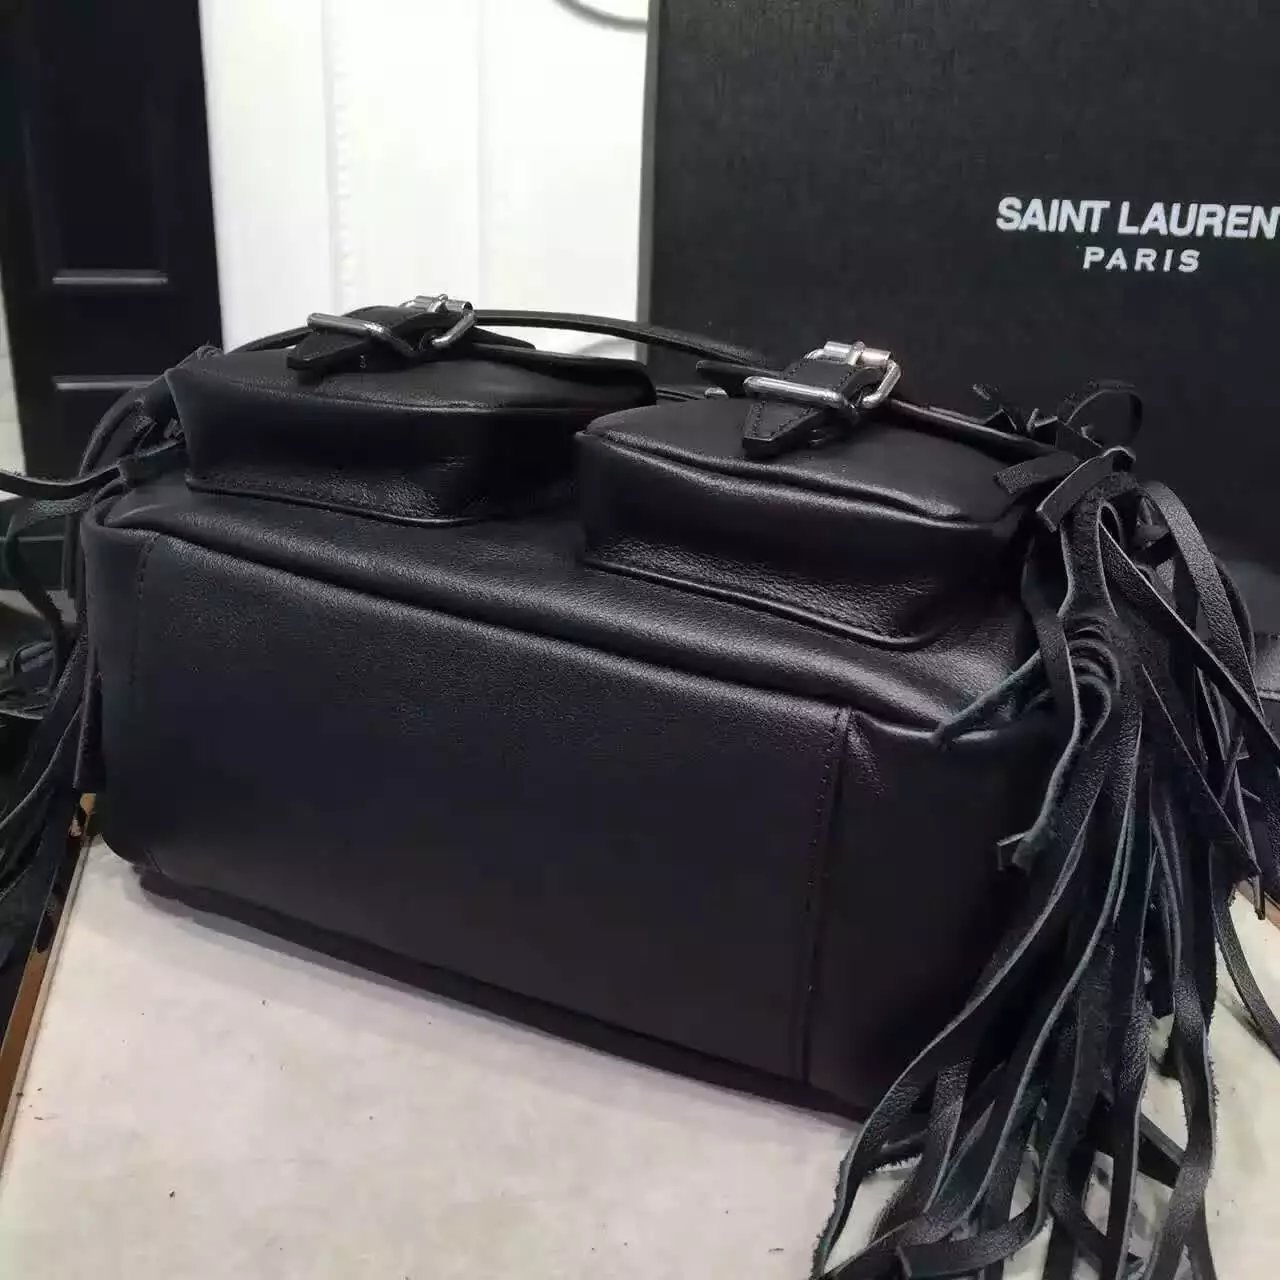 2016 Saint Laurent Bags Cheap Sale-Saint Laurent Small Festival Fringed Backpack in Black Leather - Click Image to Close